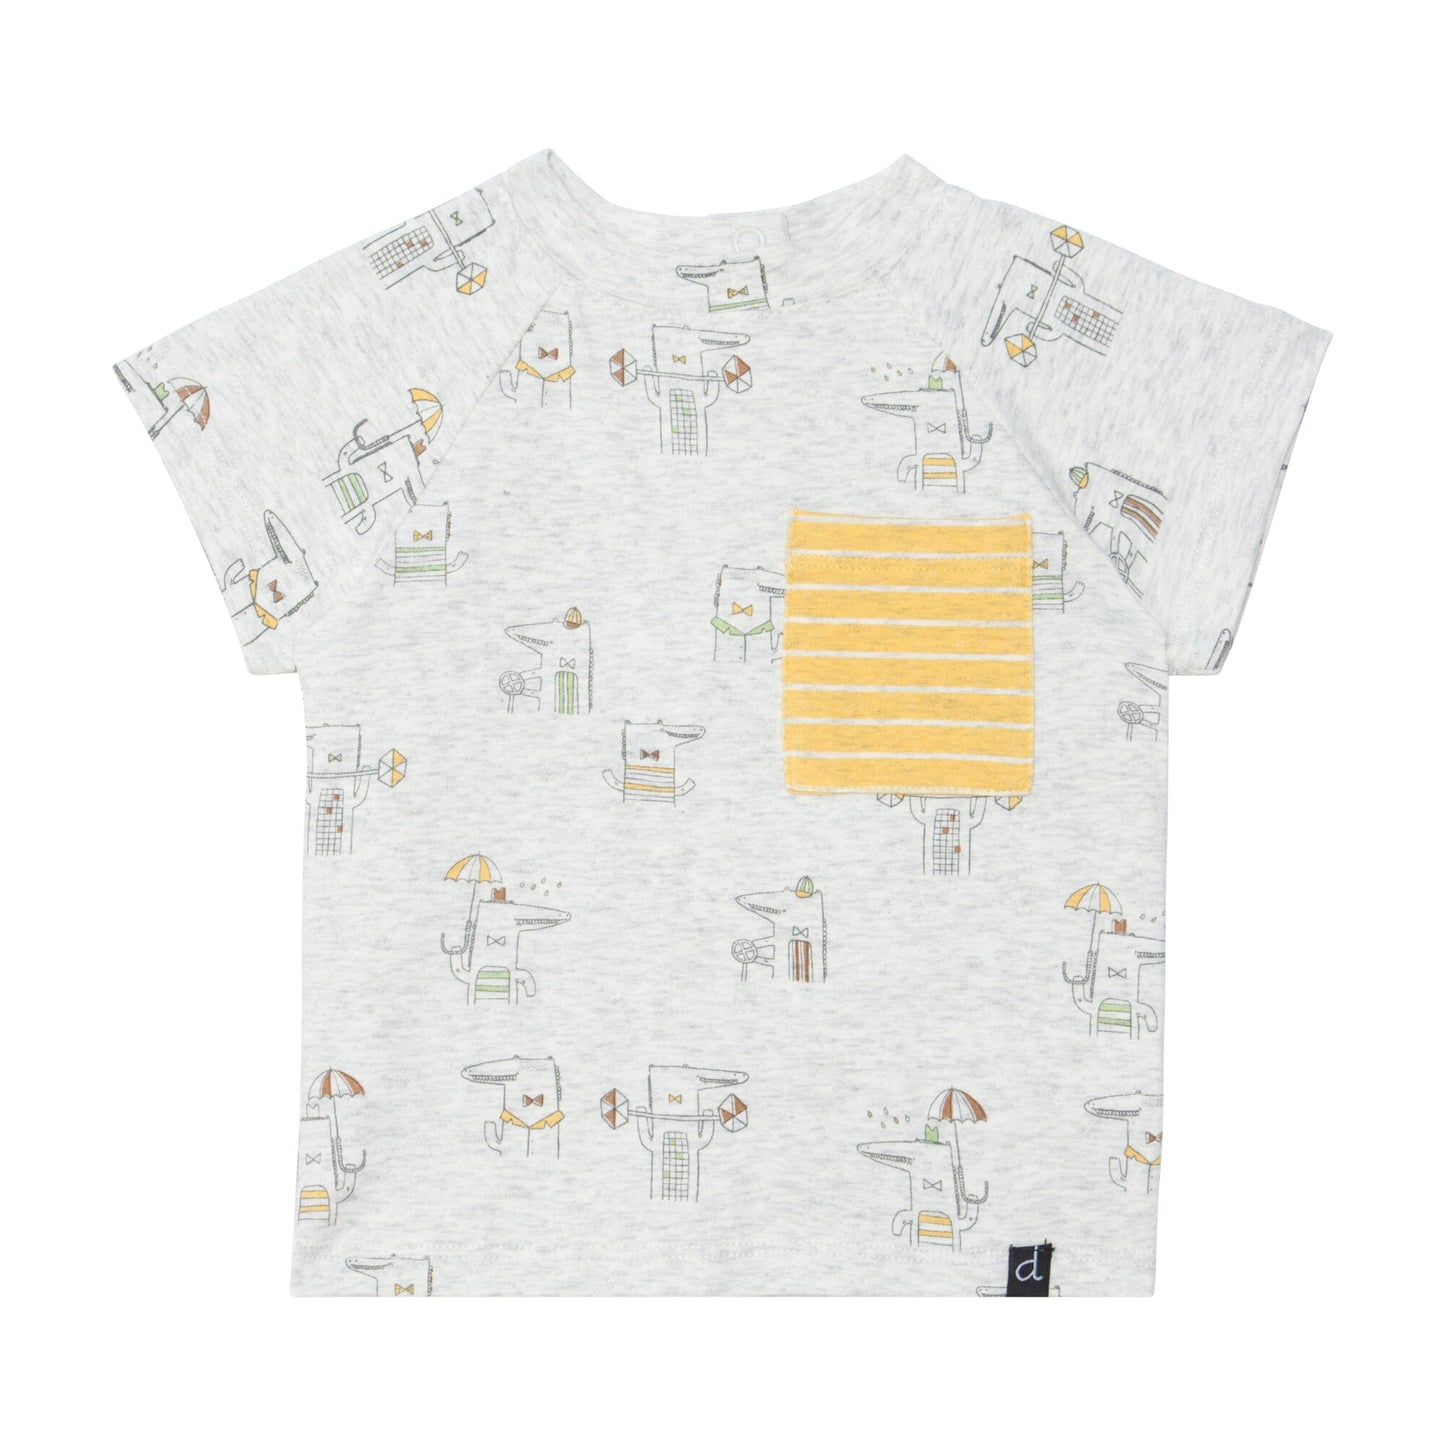 Organic Cotton Printed Top & Short Set Heather Beige Alligator With Yellow - E30D11_082